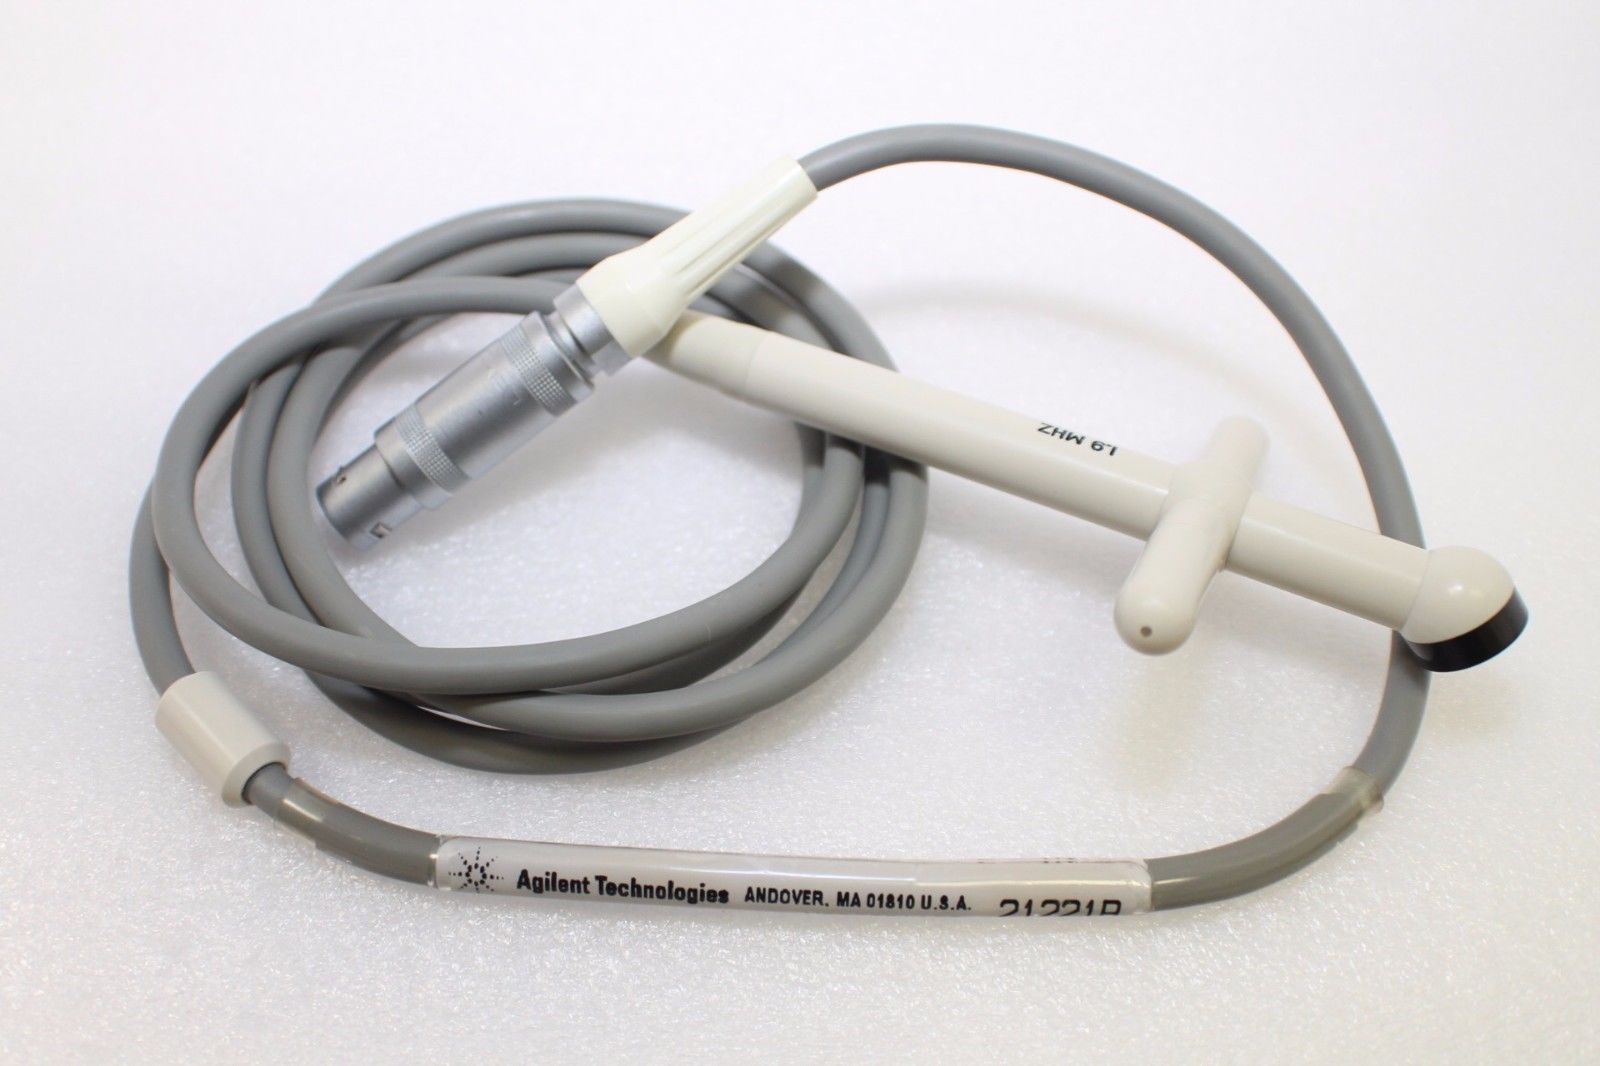 Philips D1914c piedoff ultrasound probe for the HD7